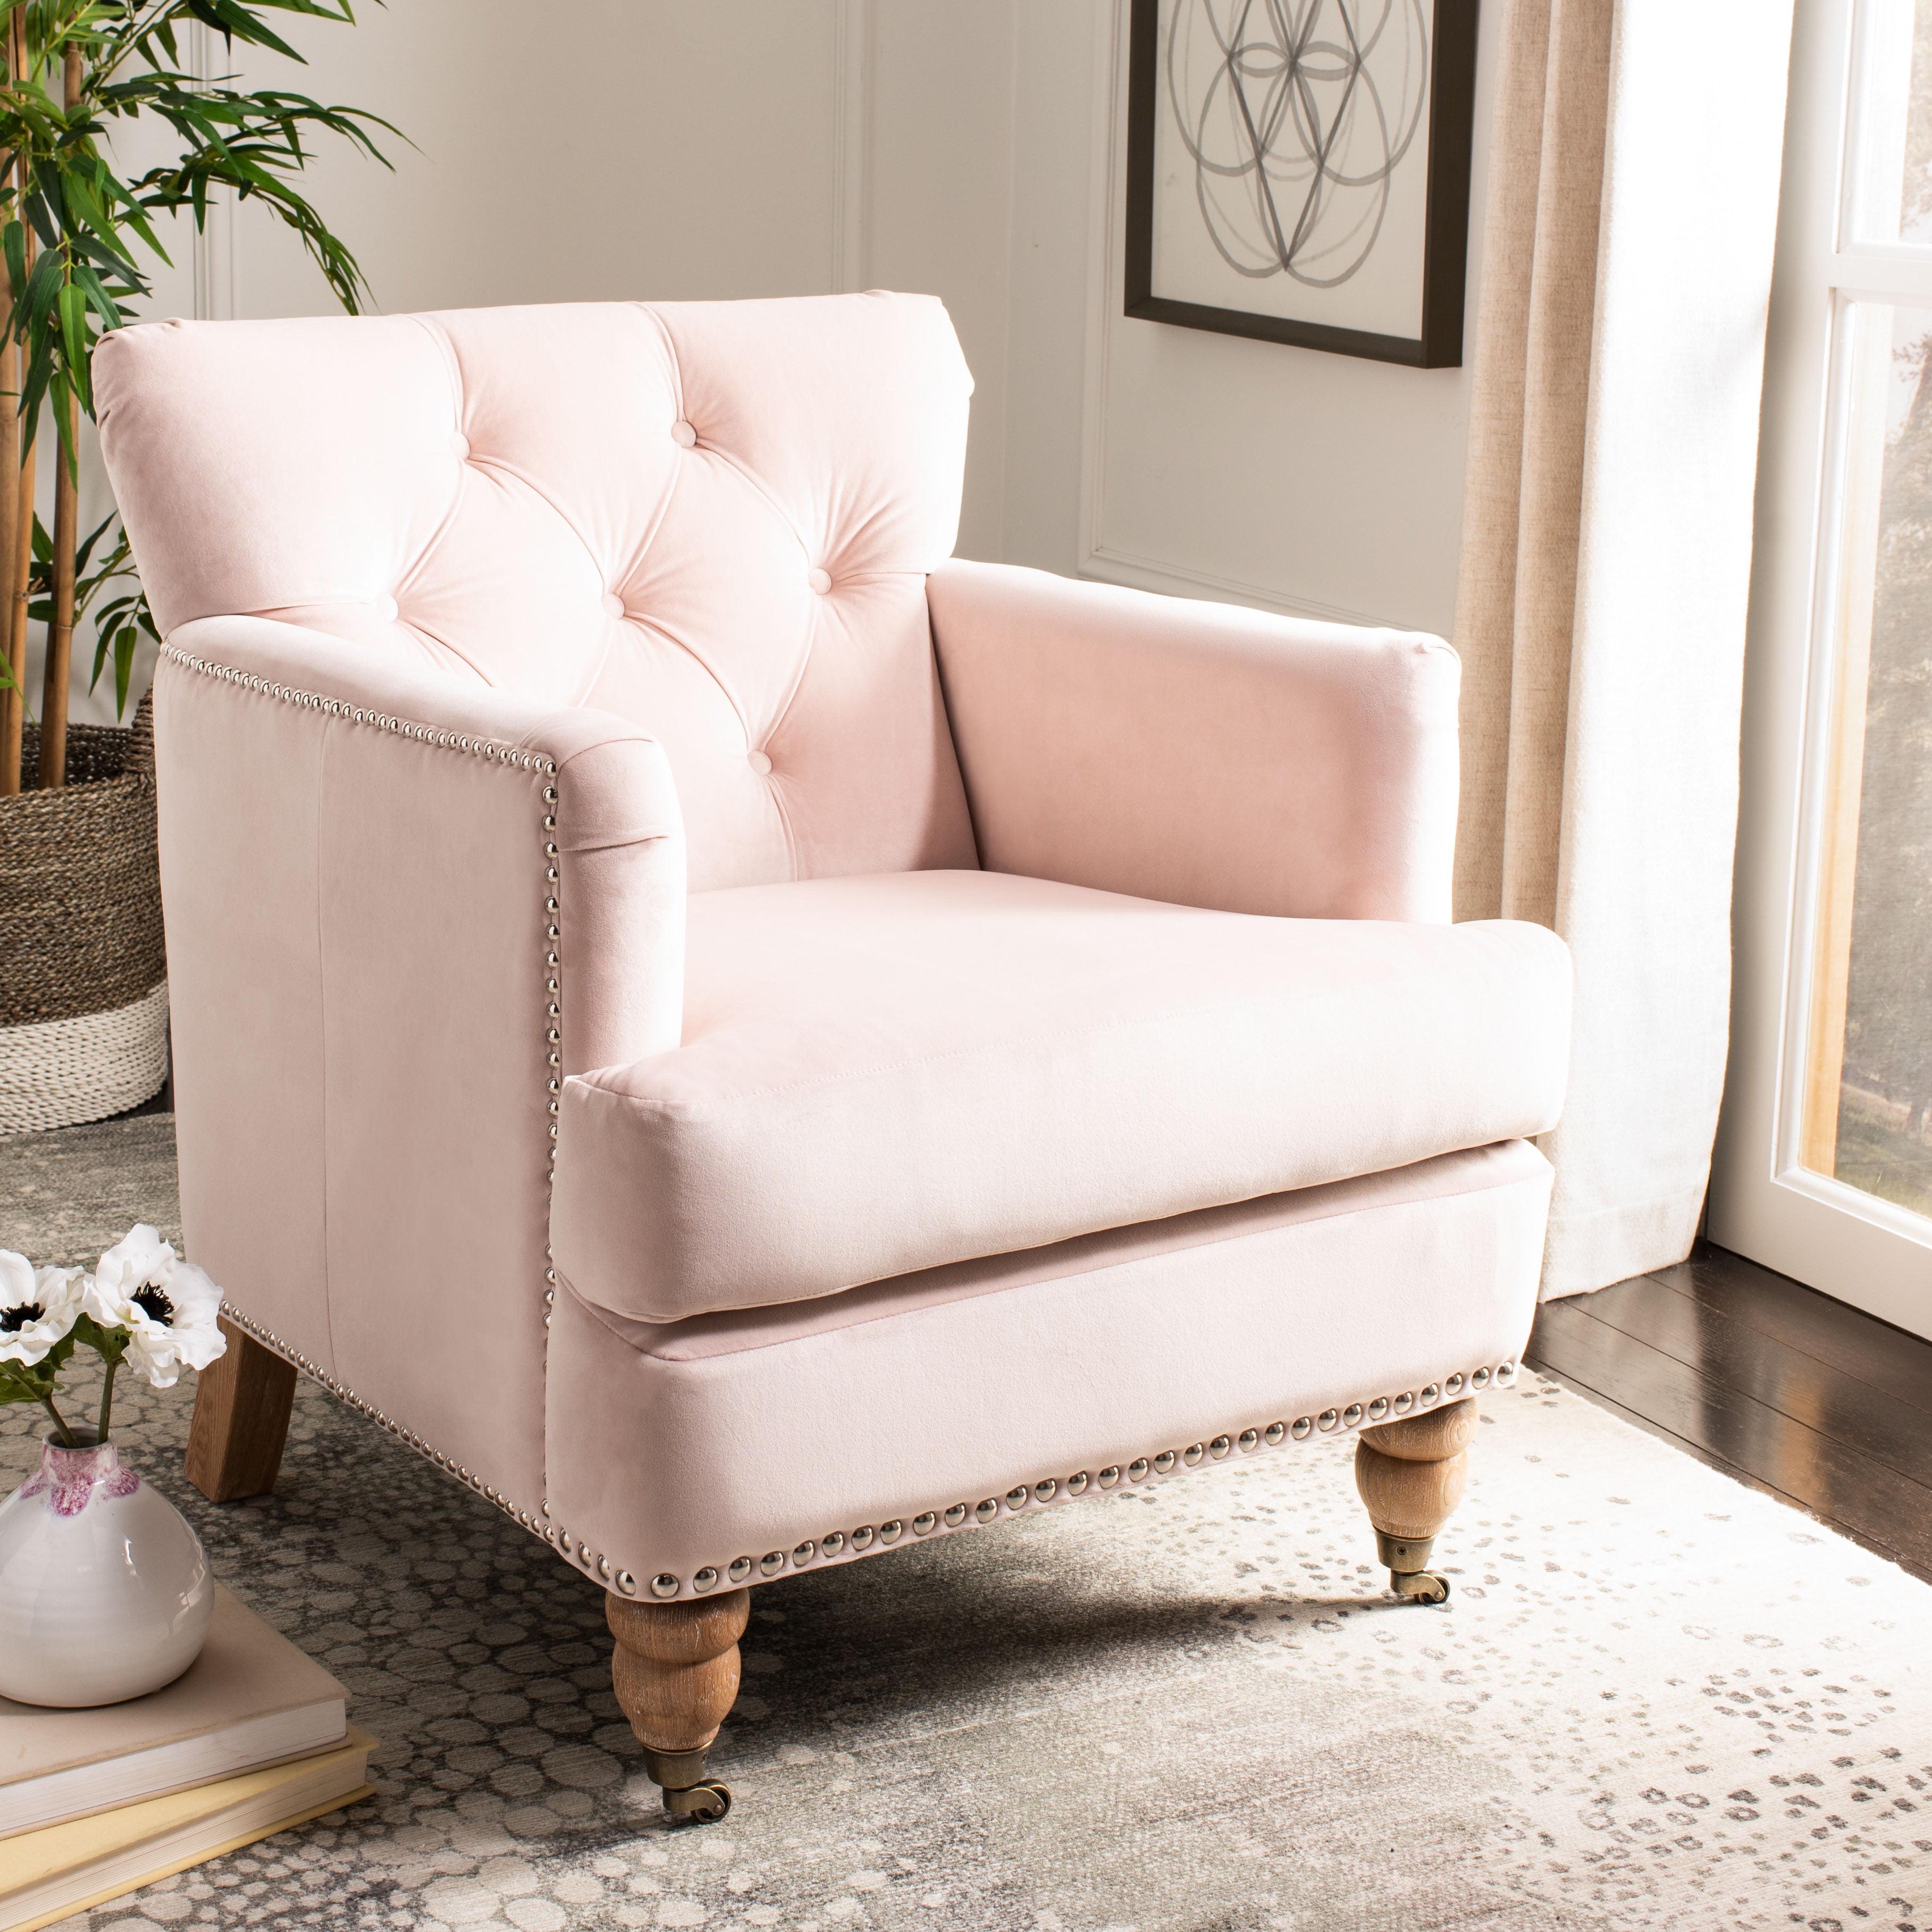 Blush Pink Velvet Contemporary Arm Chair with White Washed Birch Legs